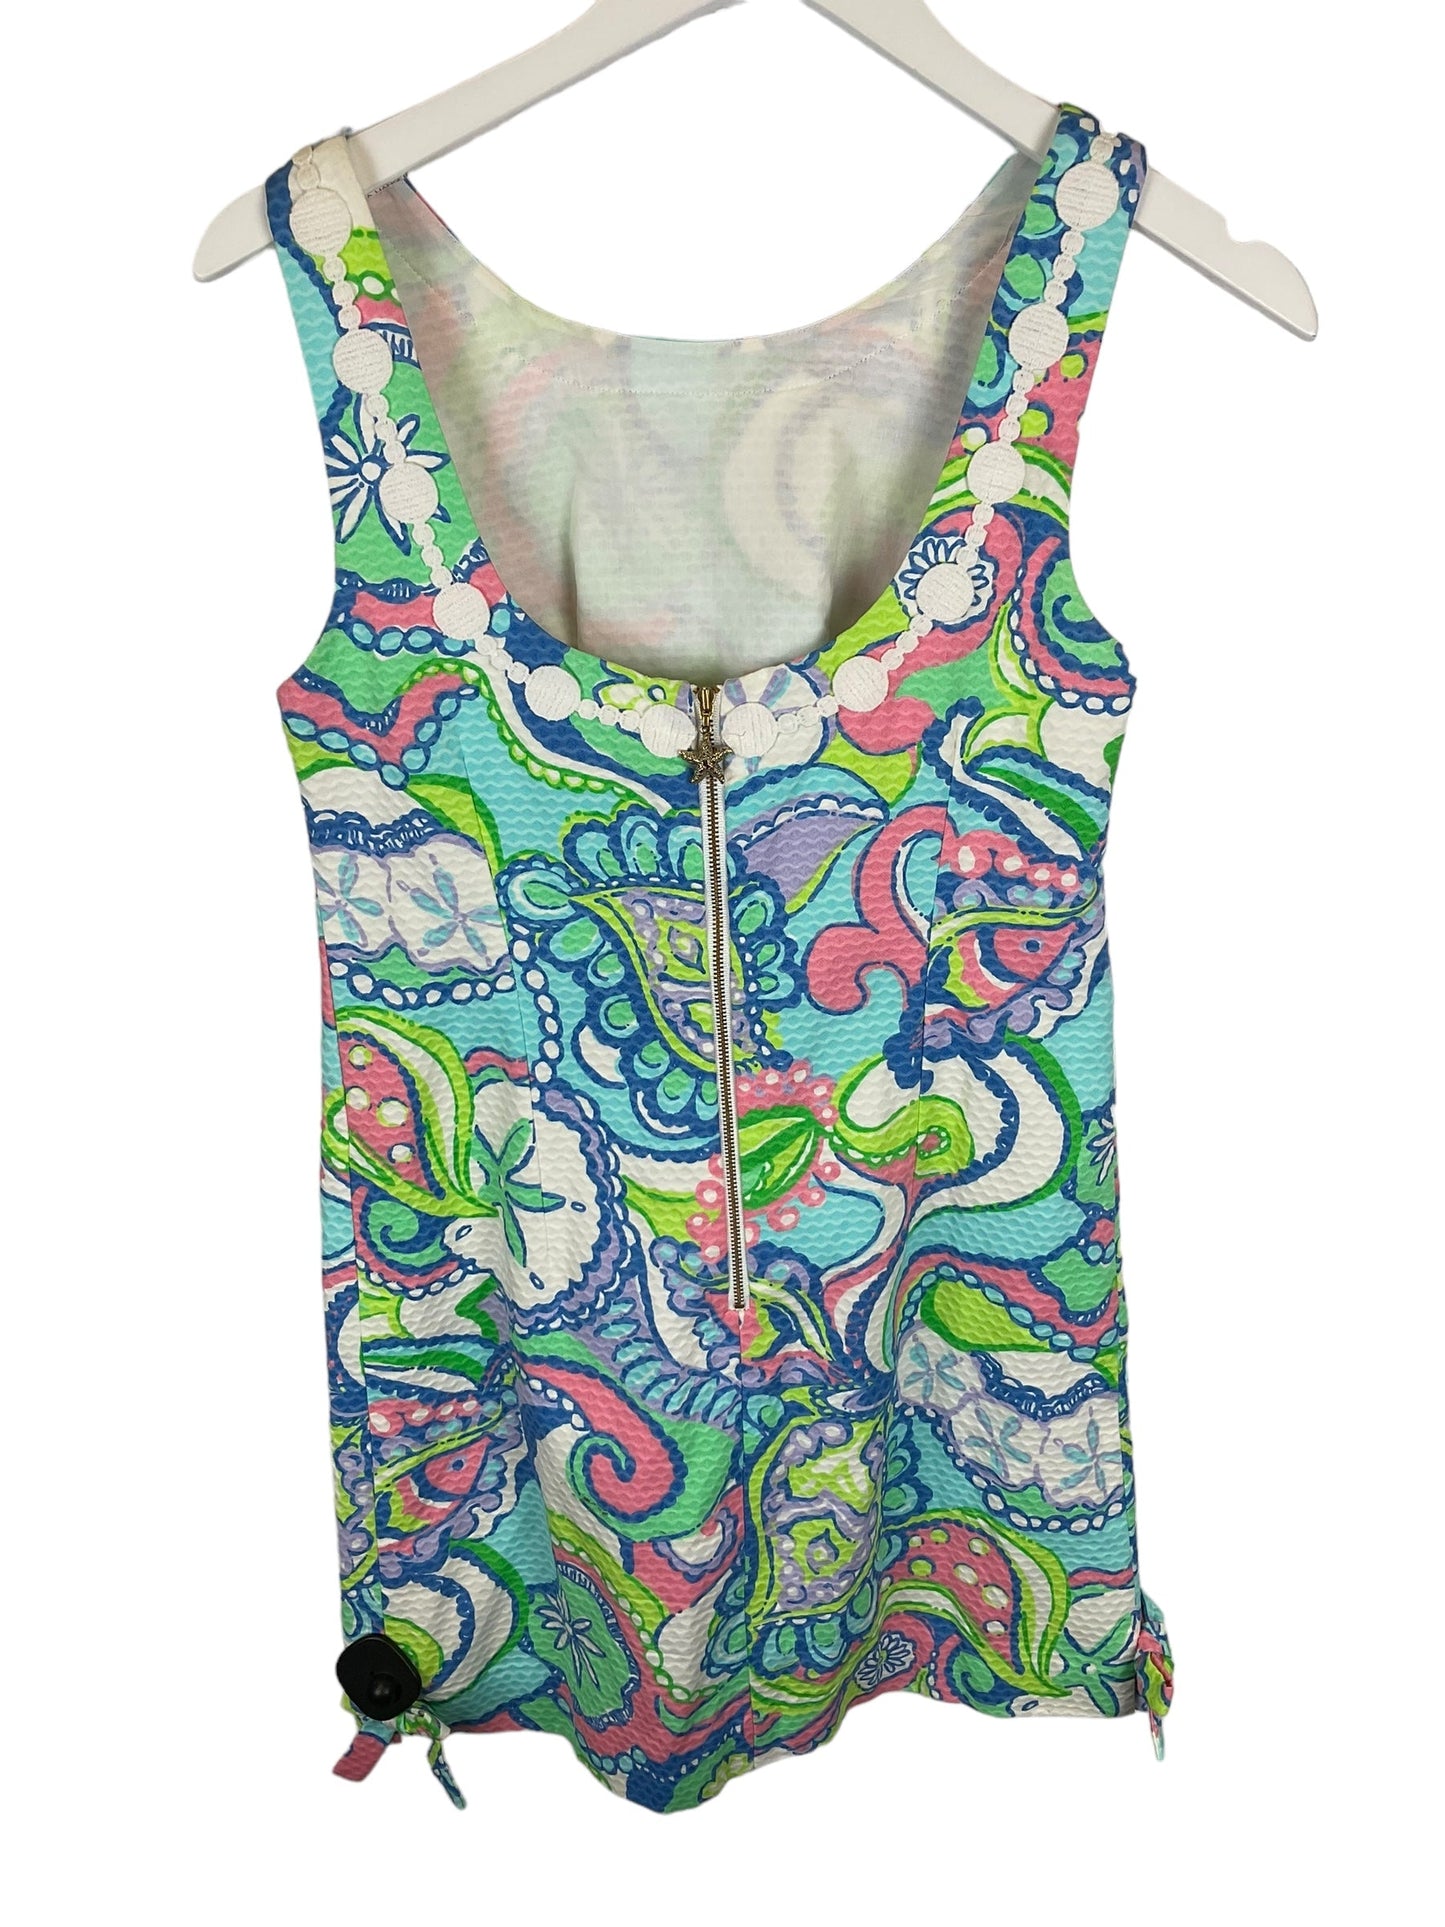 Multi-colored Dress Casual Short Lilly Pulitzer, Size 2